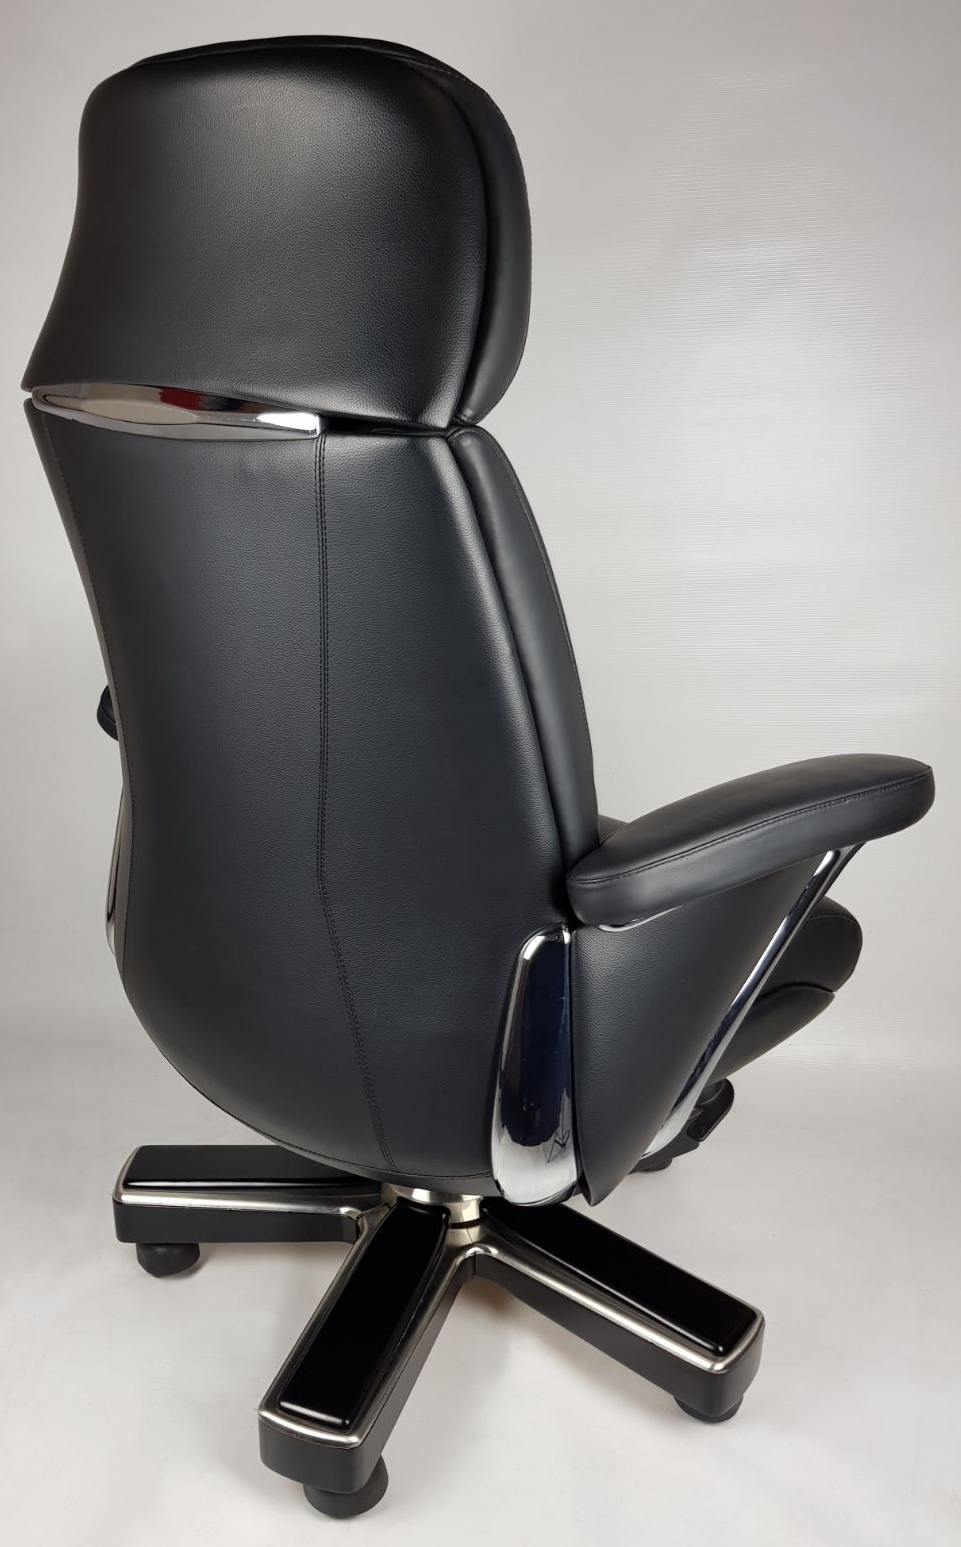 Large Luxury Executive Office Chair with Genuine Black Leather - YS1605A